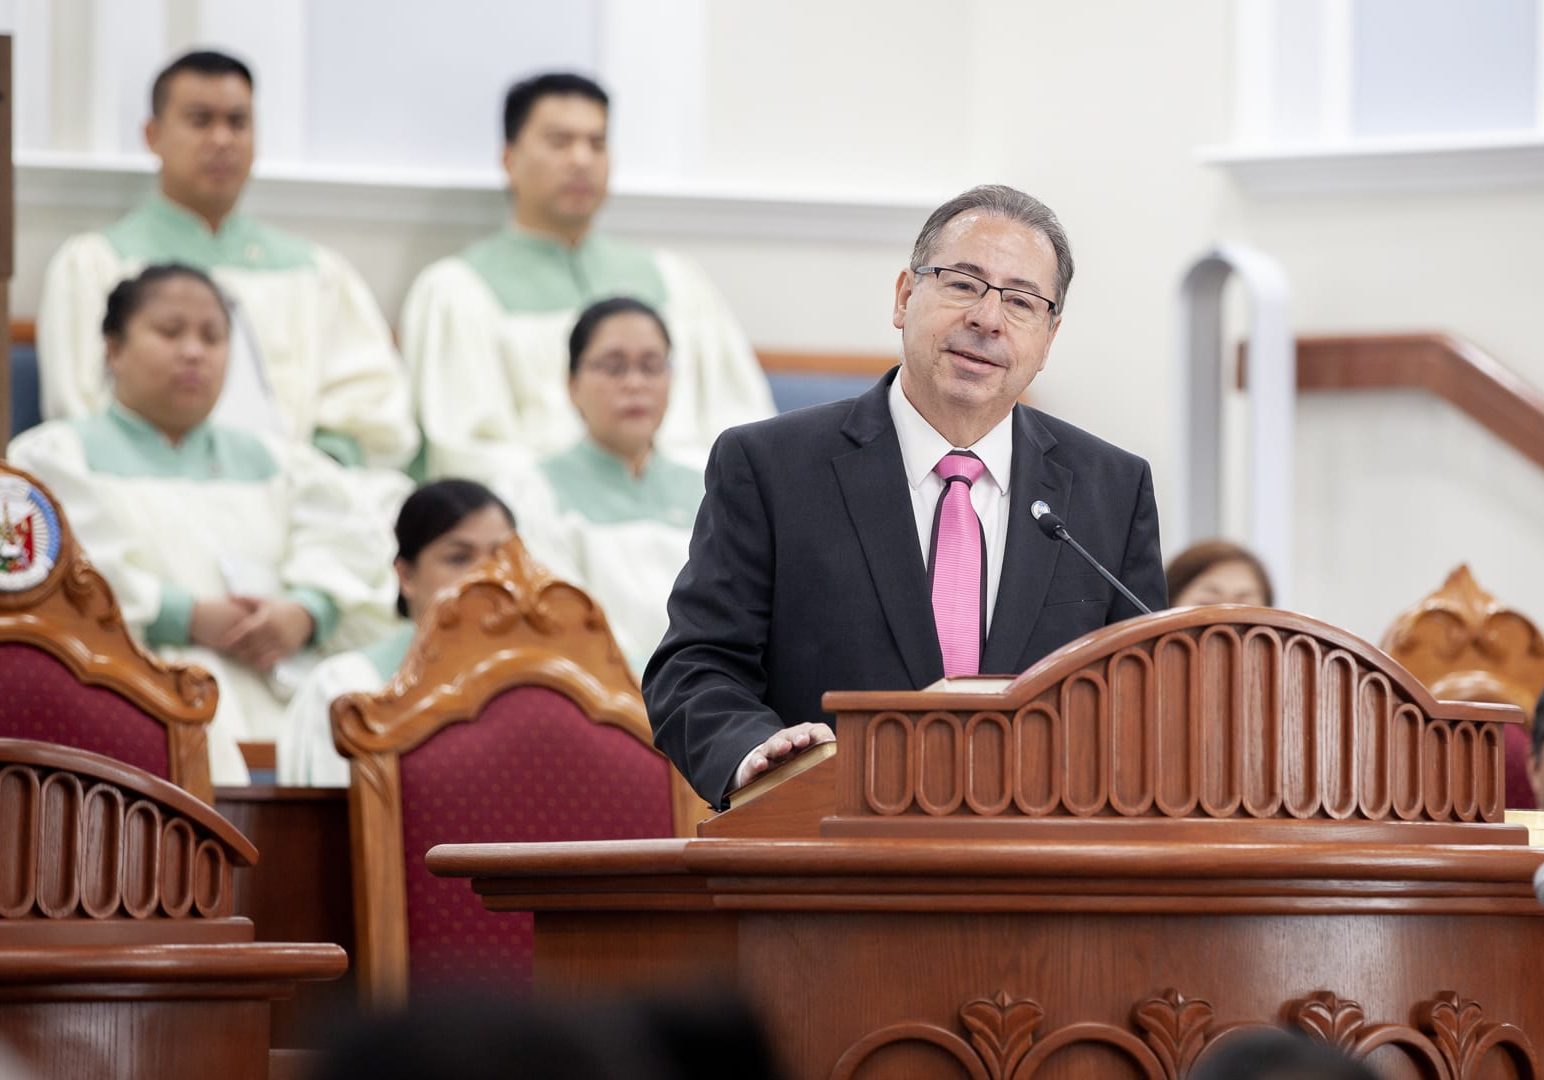 minister preaching at podium with choir members in the background